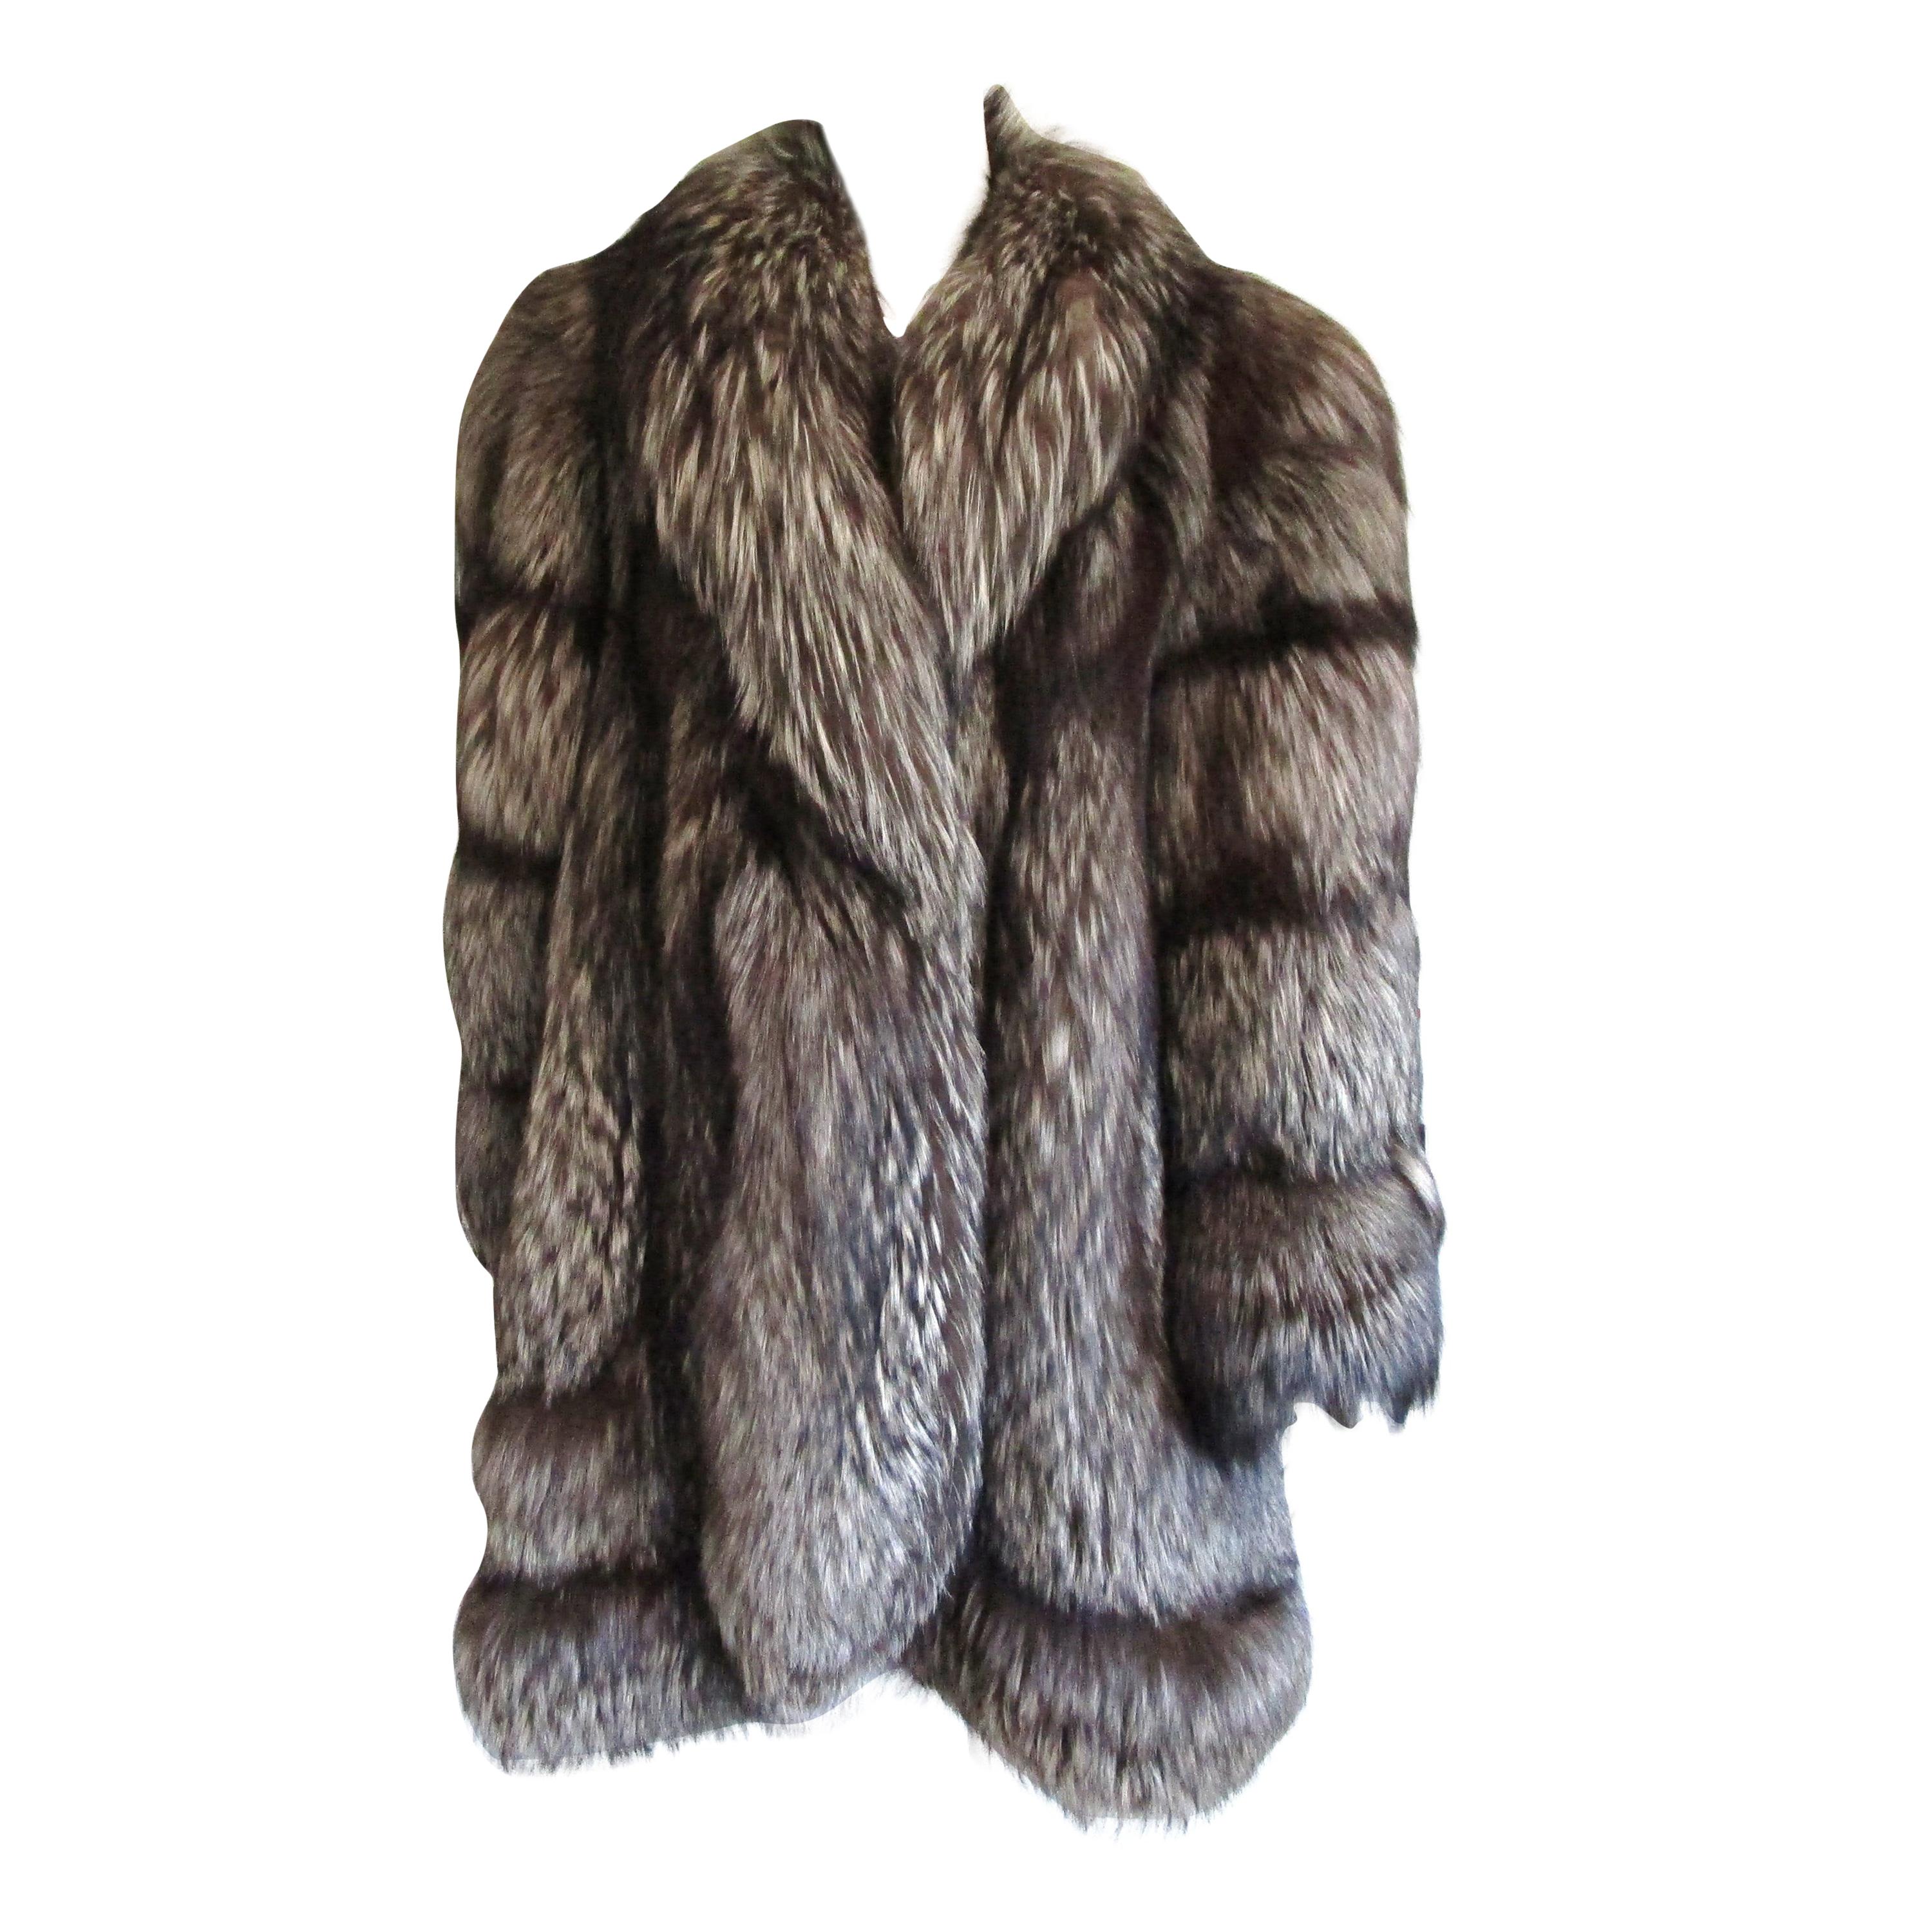  Fox Swing Coat Over sized Large Unisex - Silver Tipped 14-16 Scalloped Detail